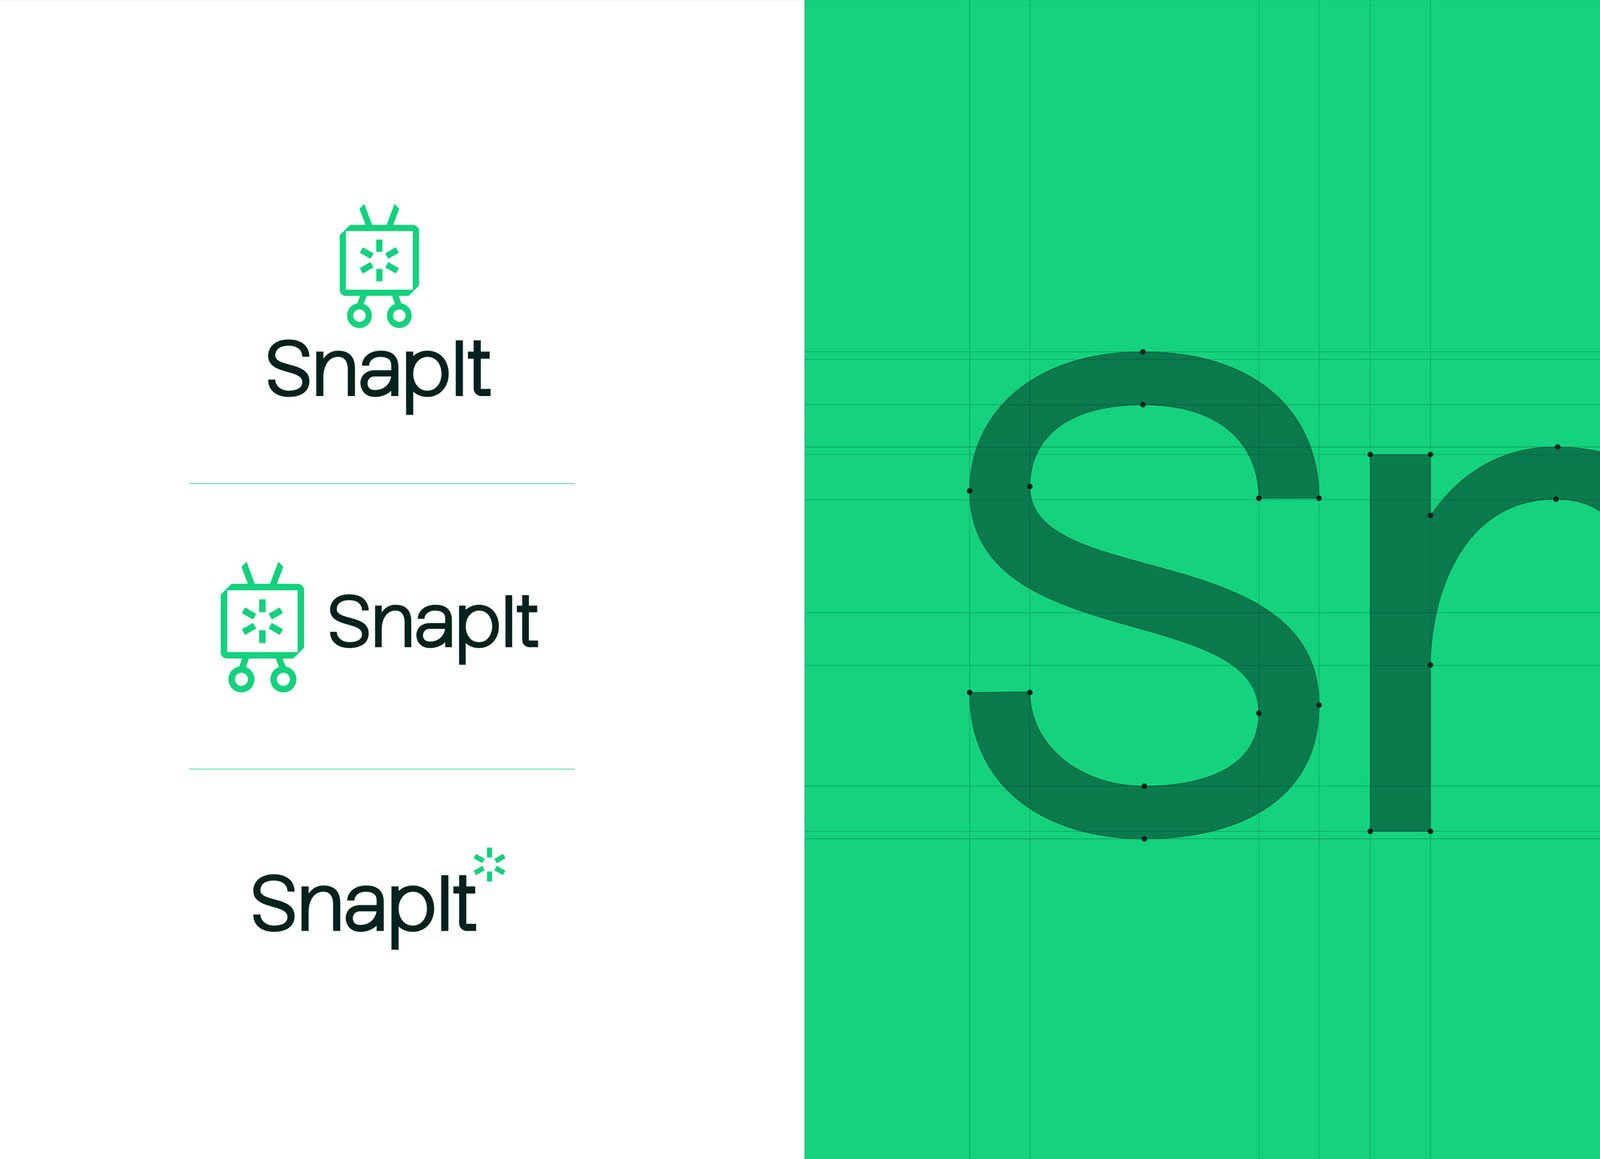 Logo lockups for SnapIt